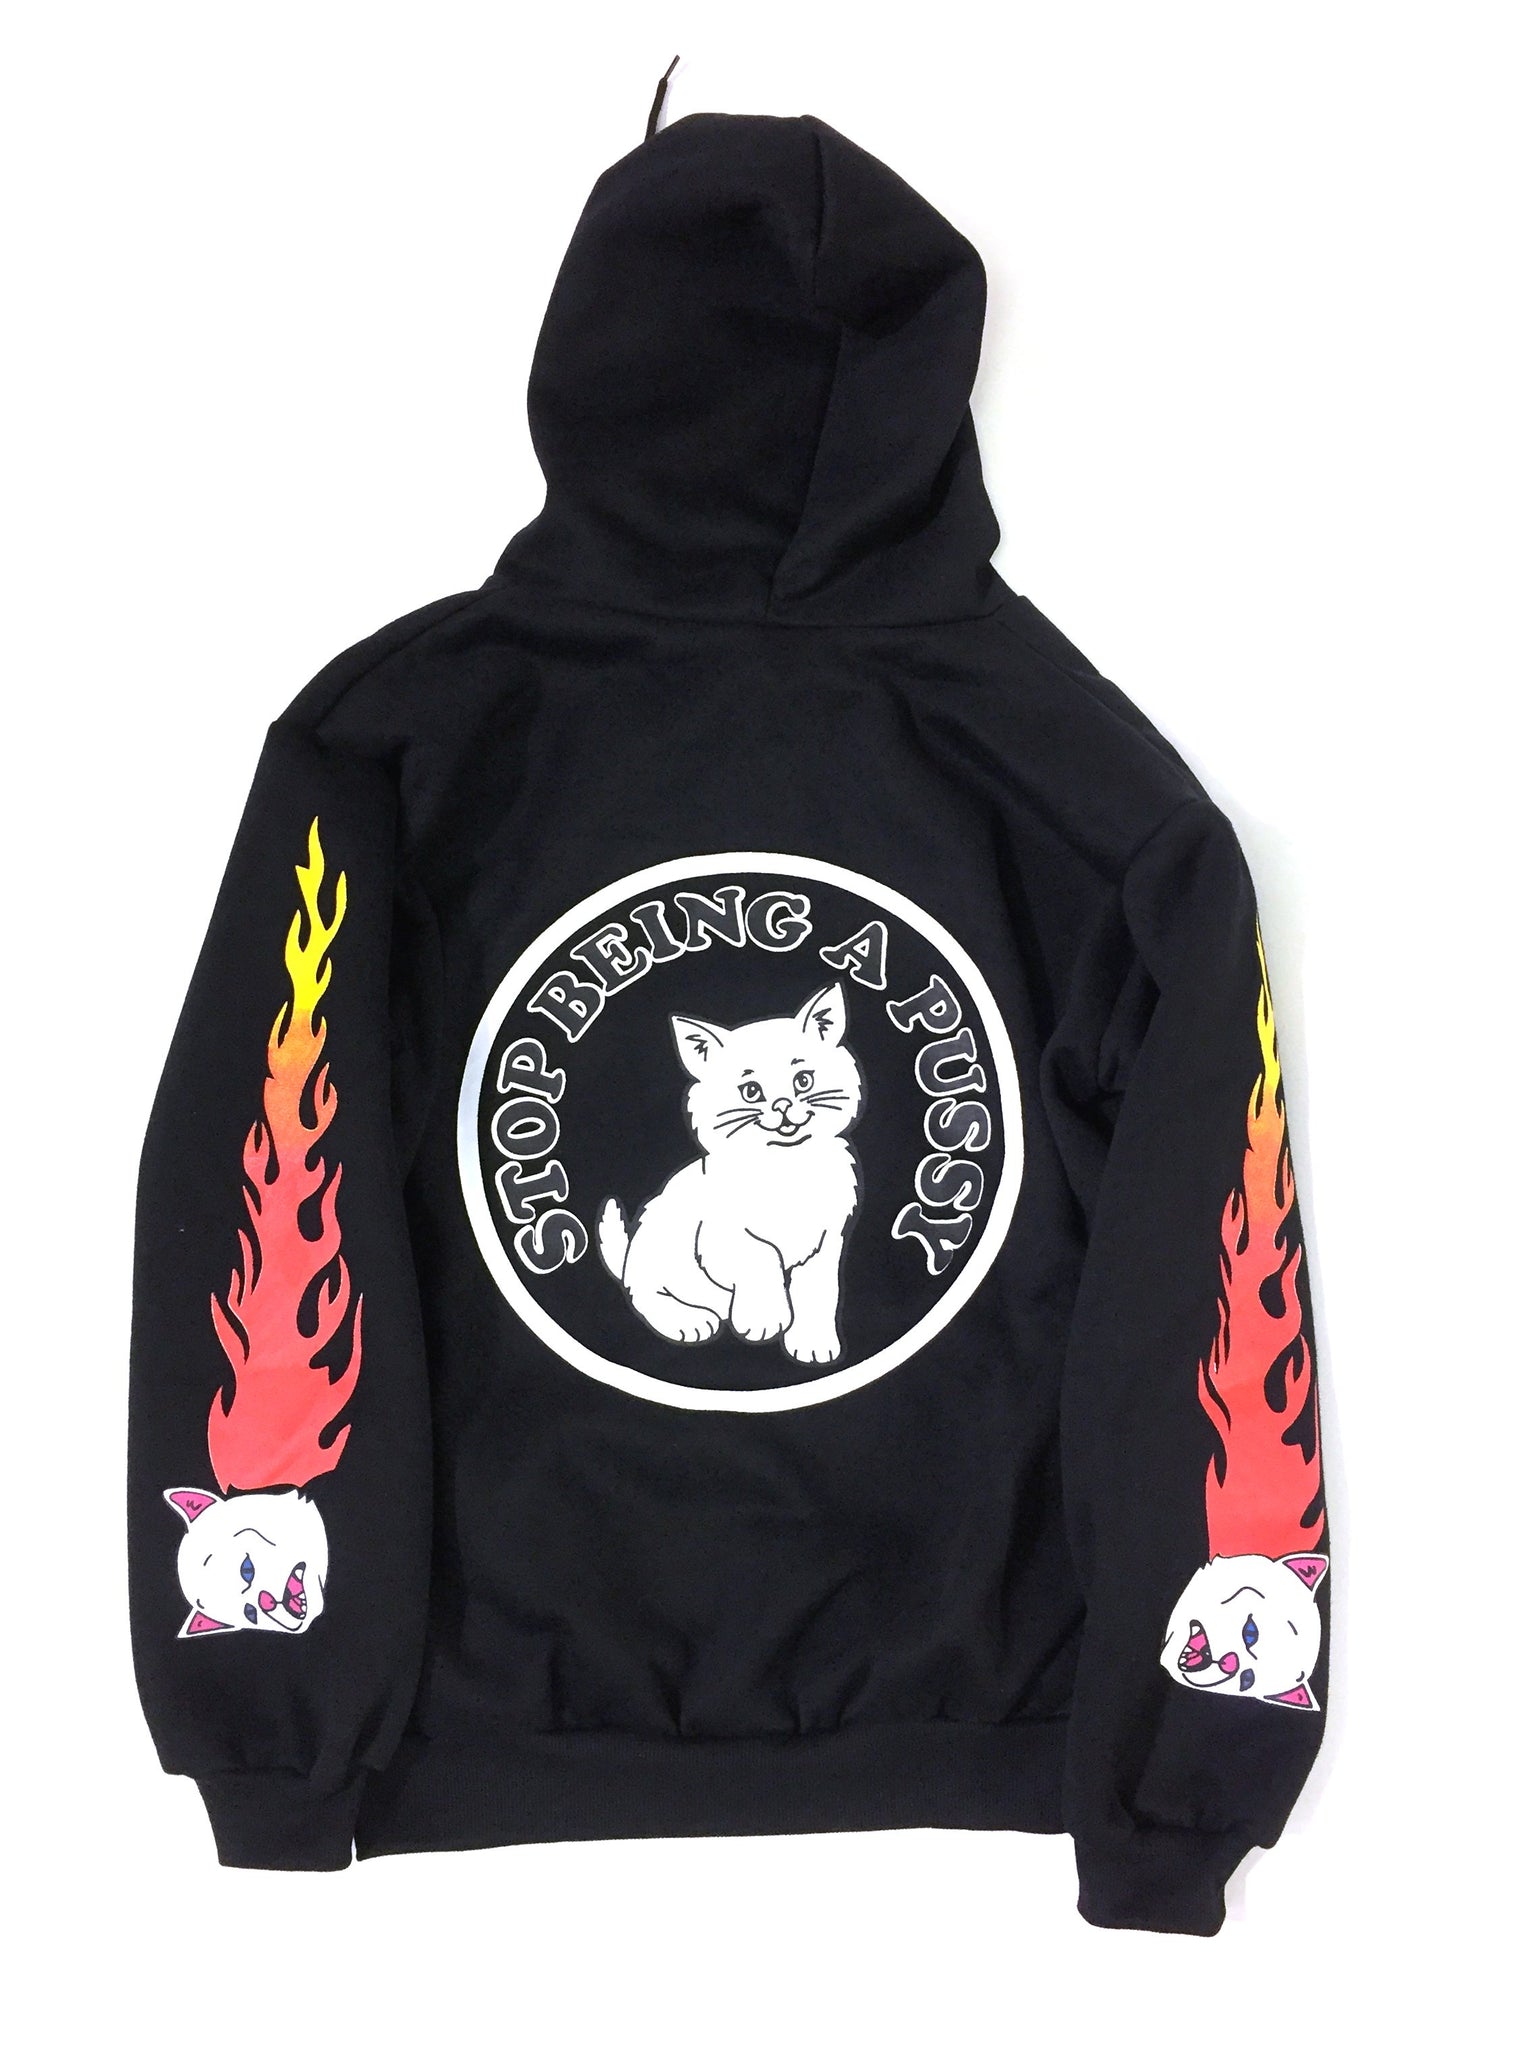 Stop Being a Pussy! Hoodie